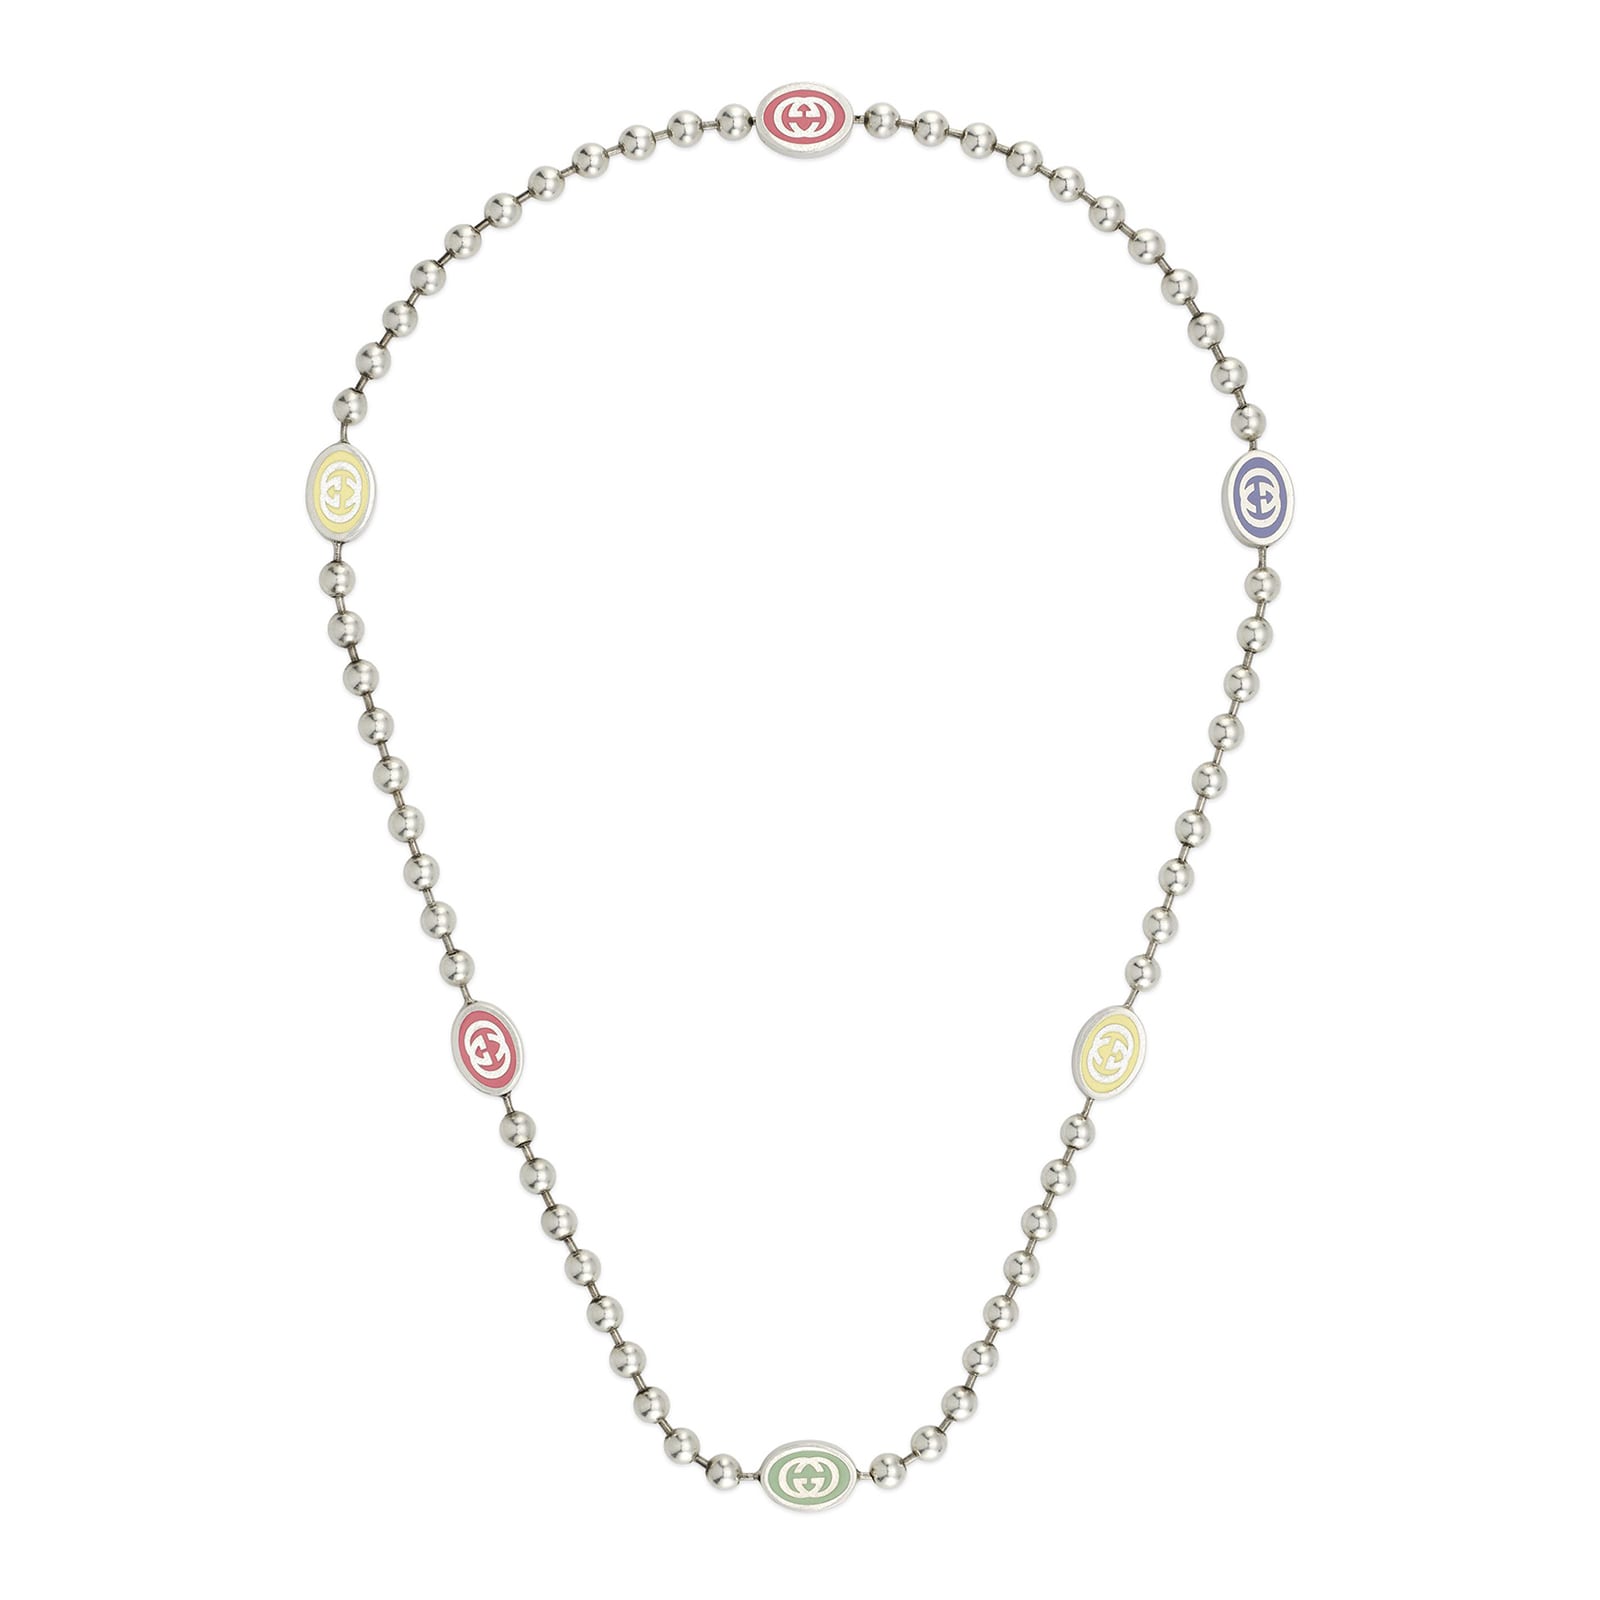 Gucci Gucci Flora 18K Beaded Diamond Necklace | Necklace, Beaded chain,  Necklace lengths